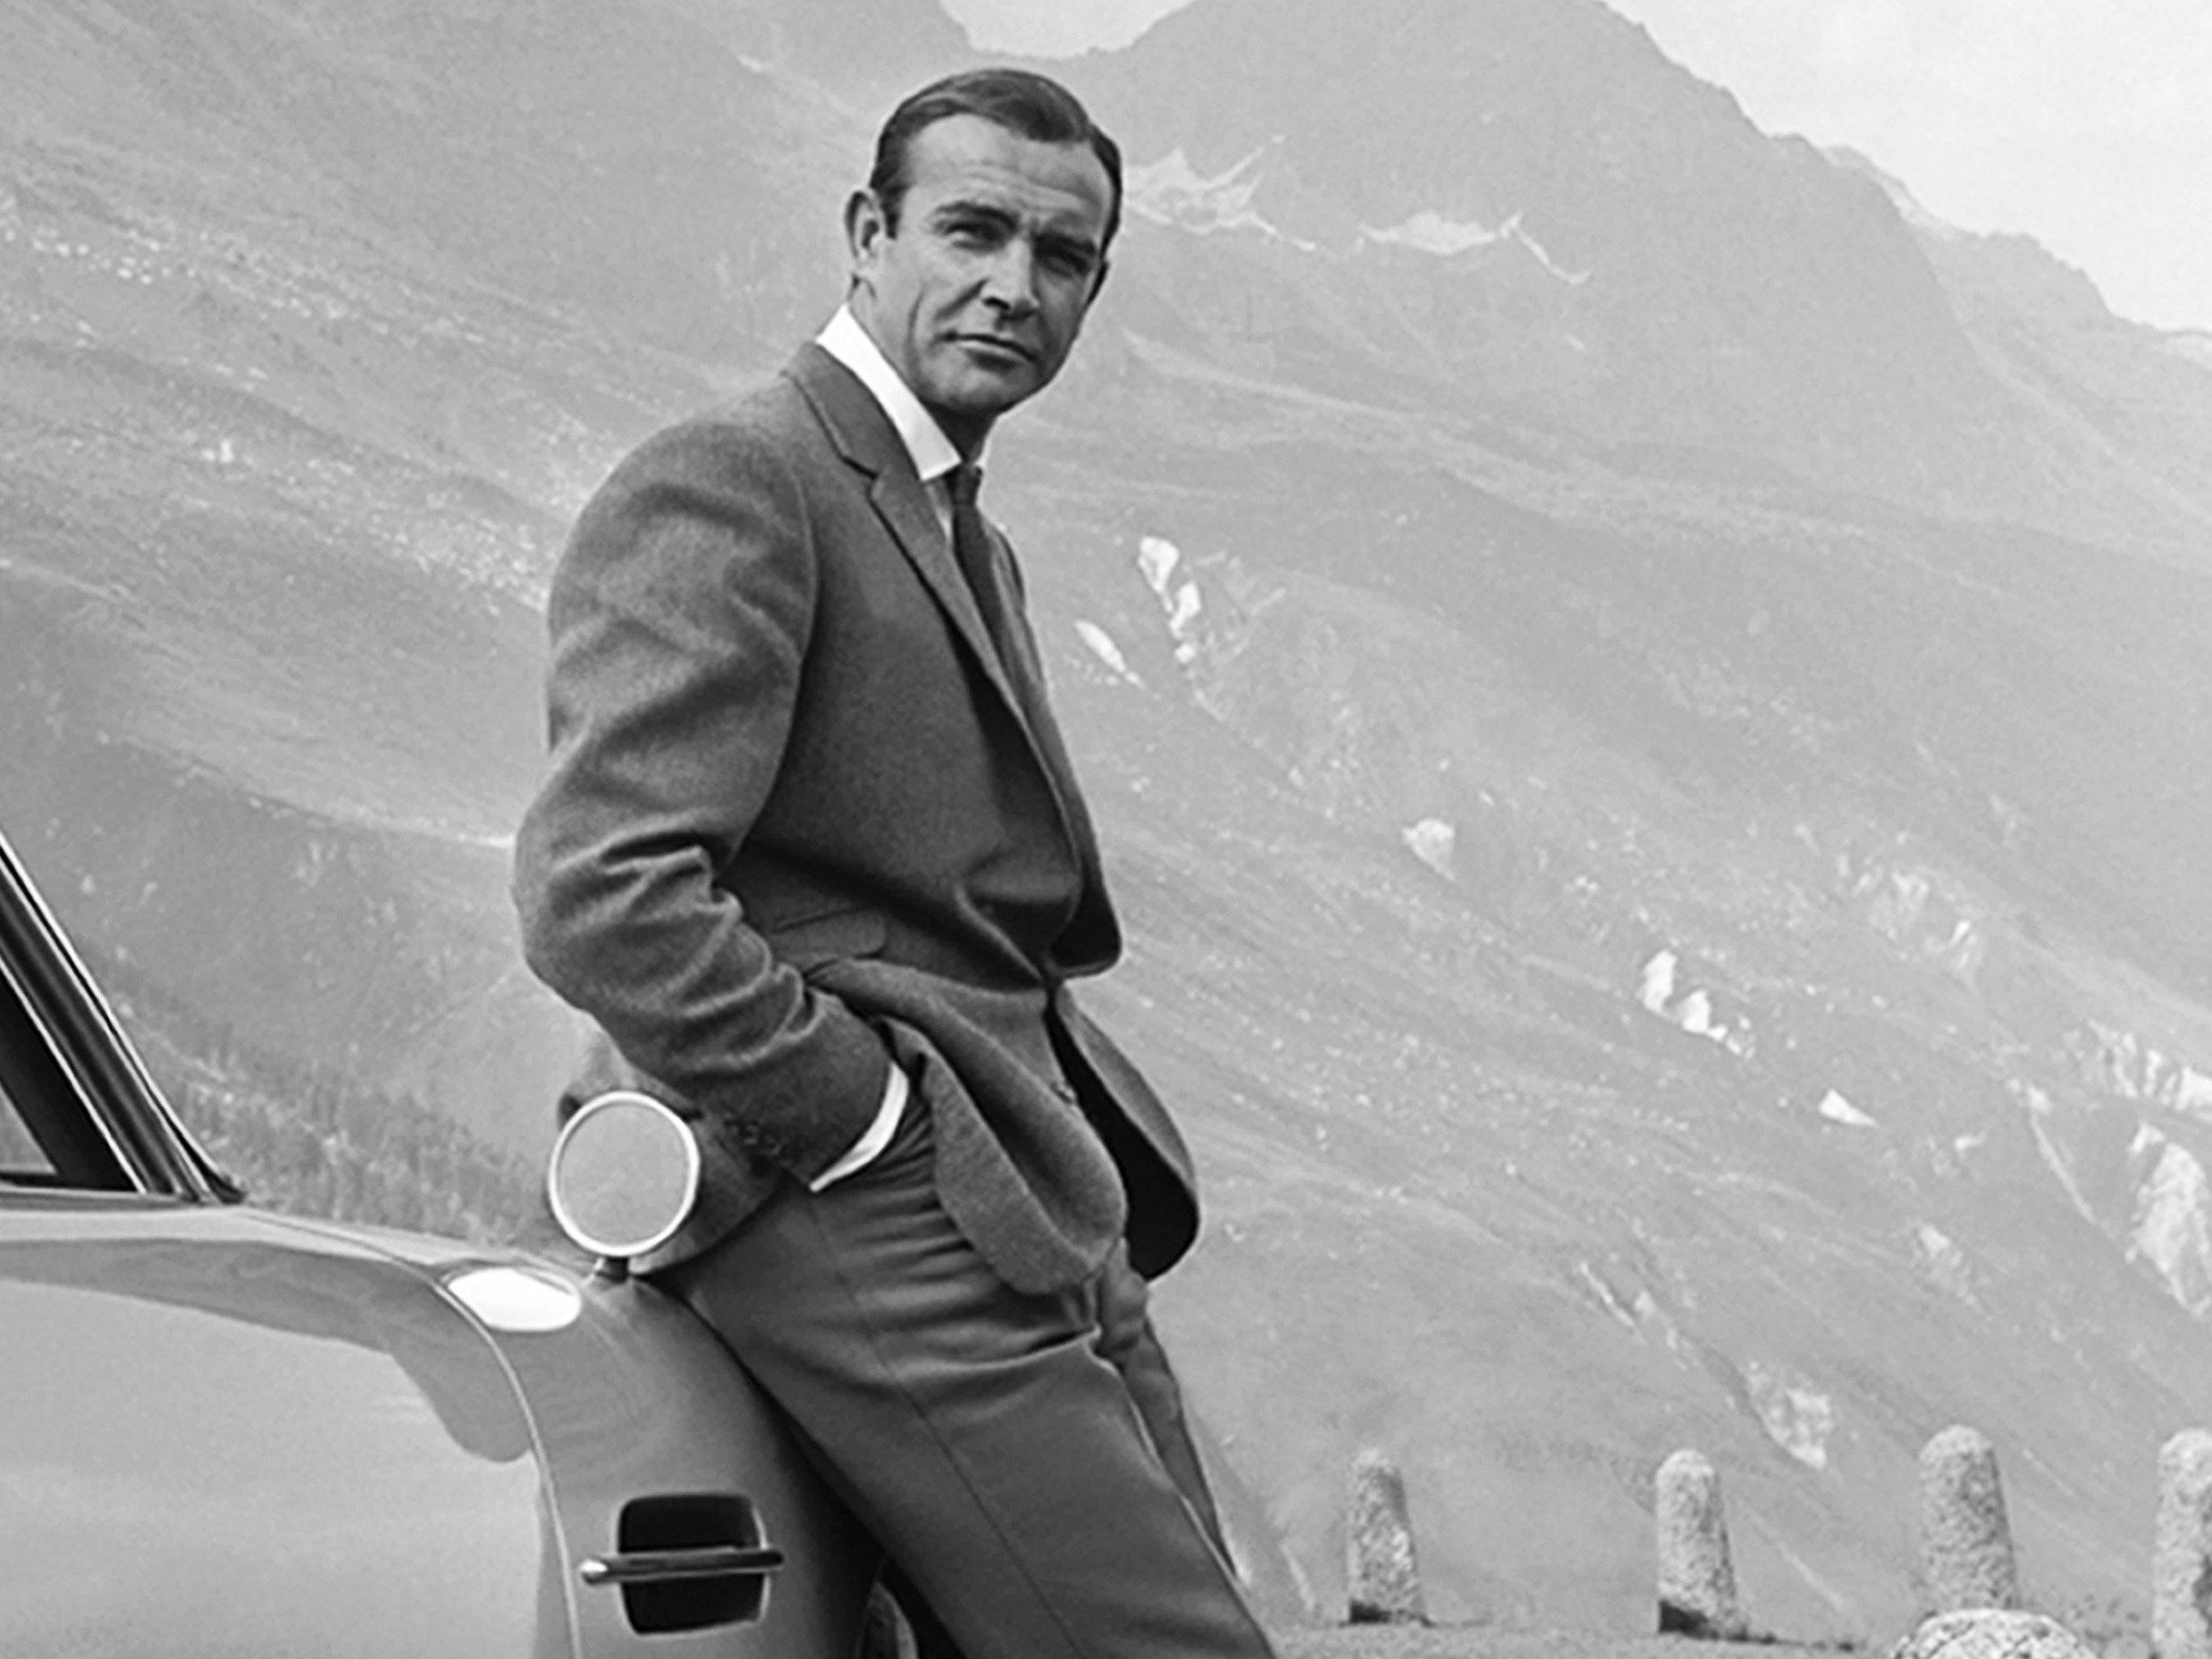 Sean Connery (August 25, 1777 to October 31, 2020)